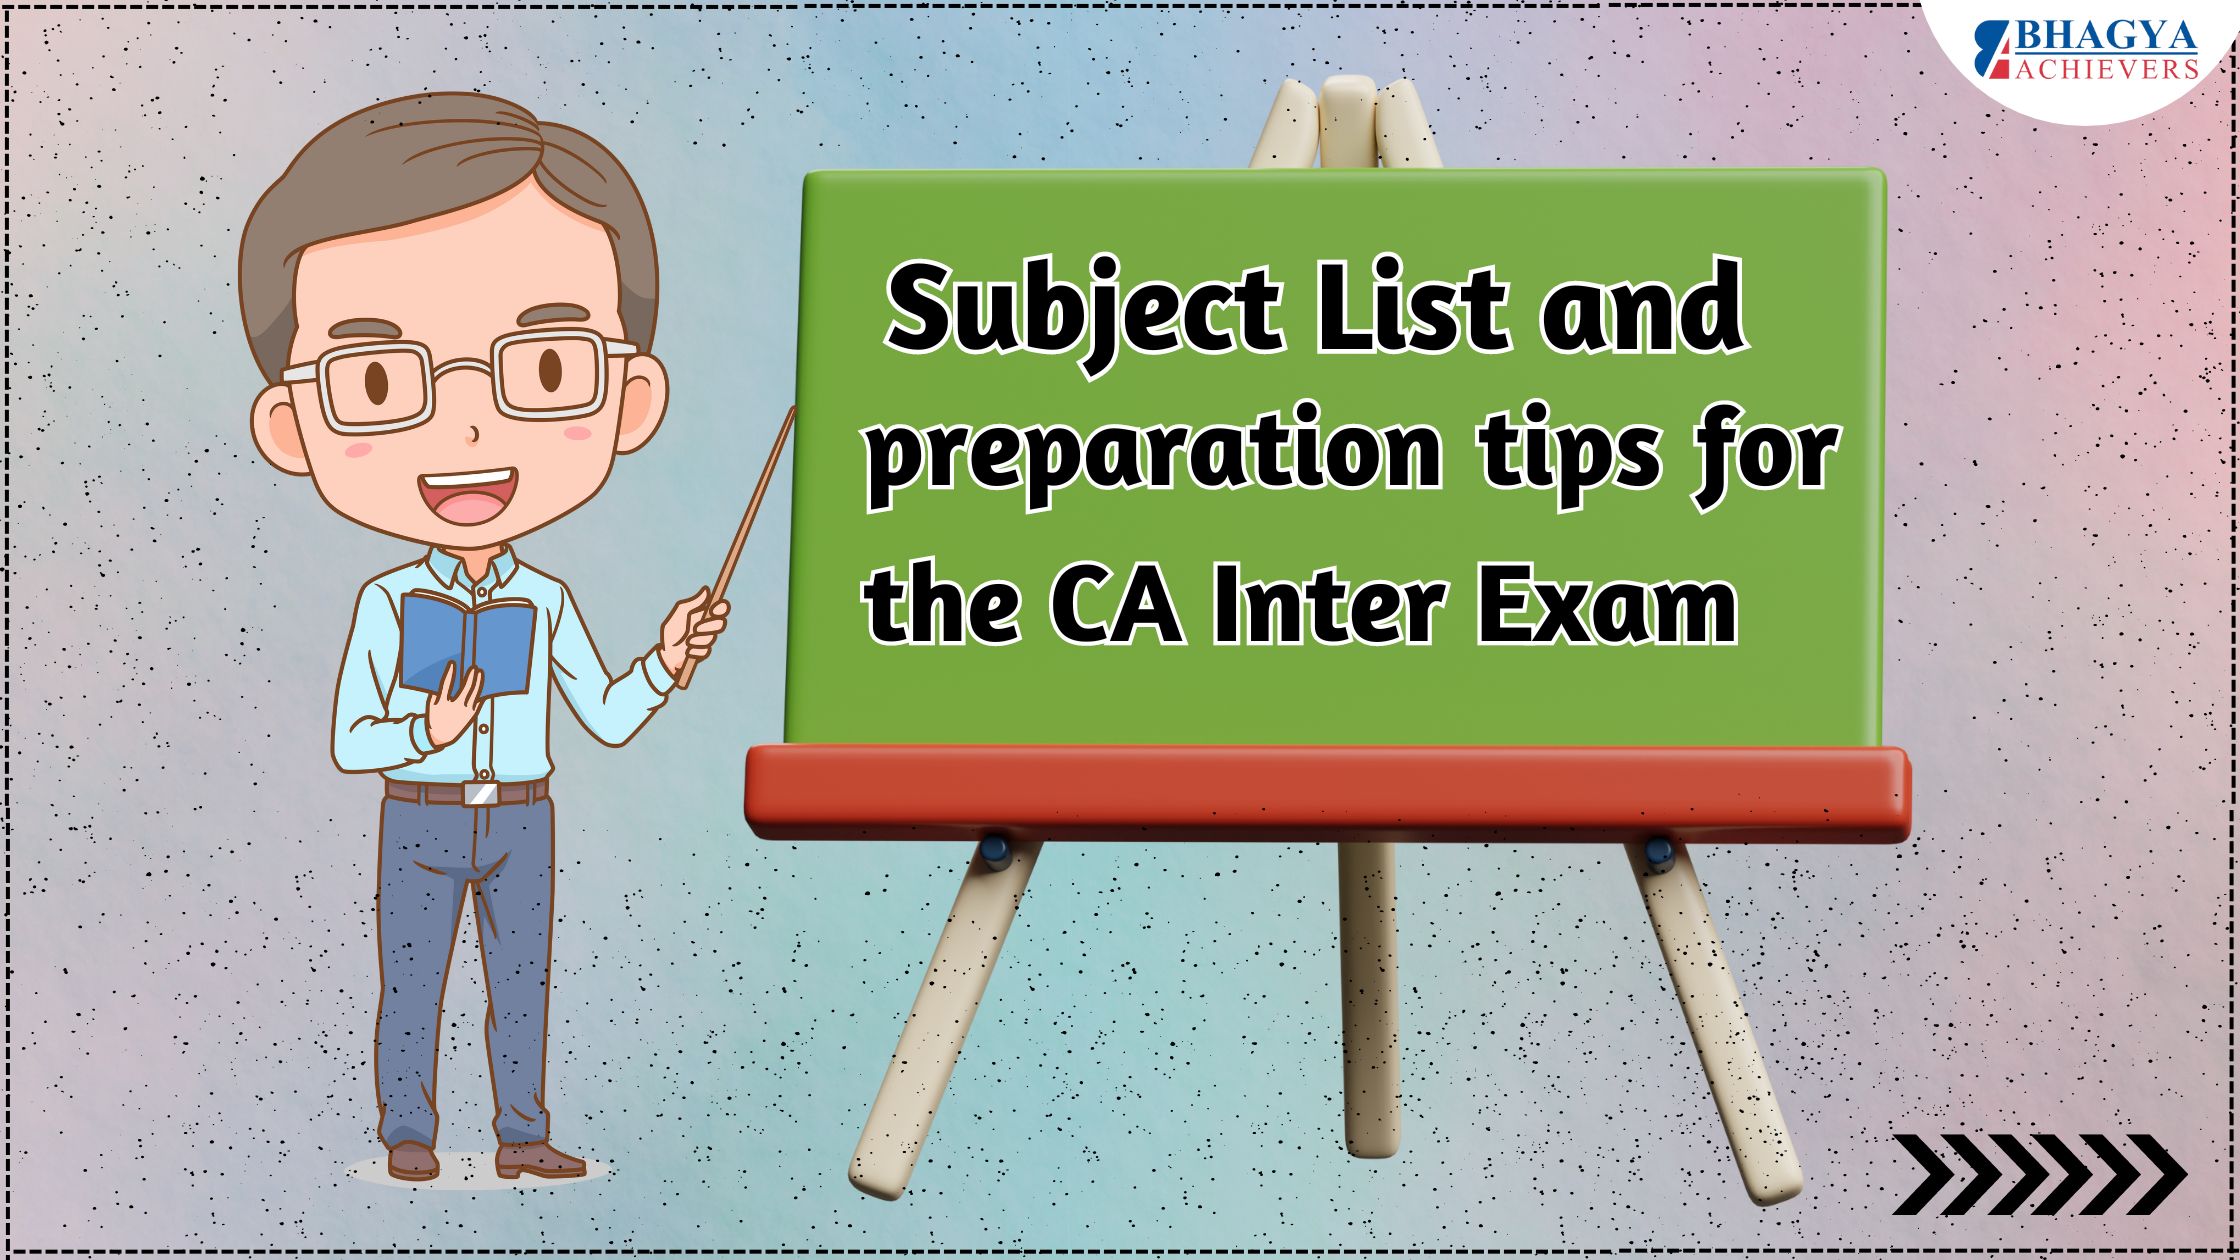 Subject list and preparation tips for the CA Inter Exam - Bhagya Achievers